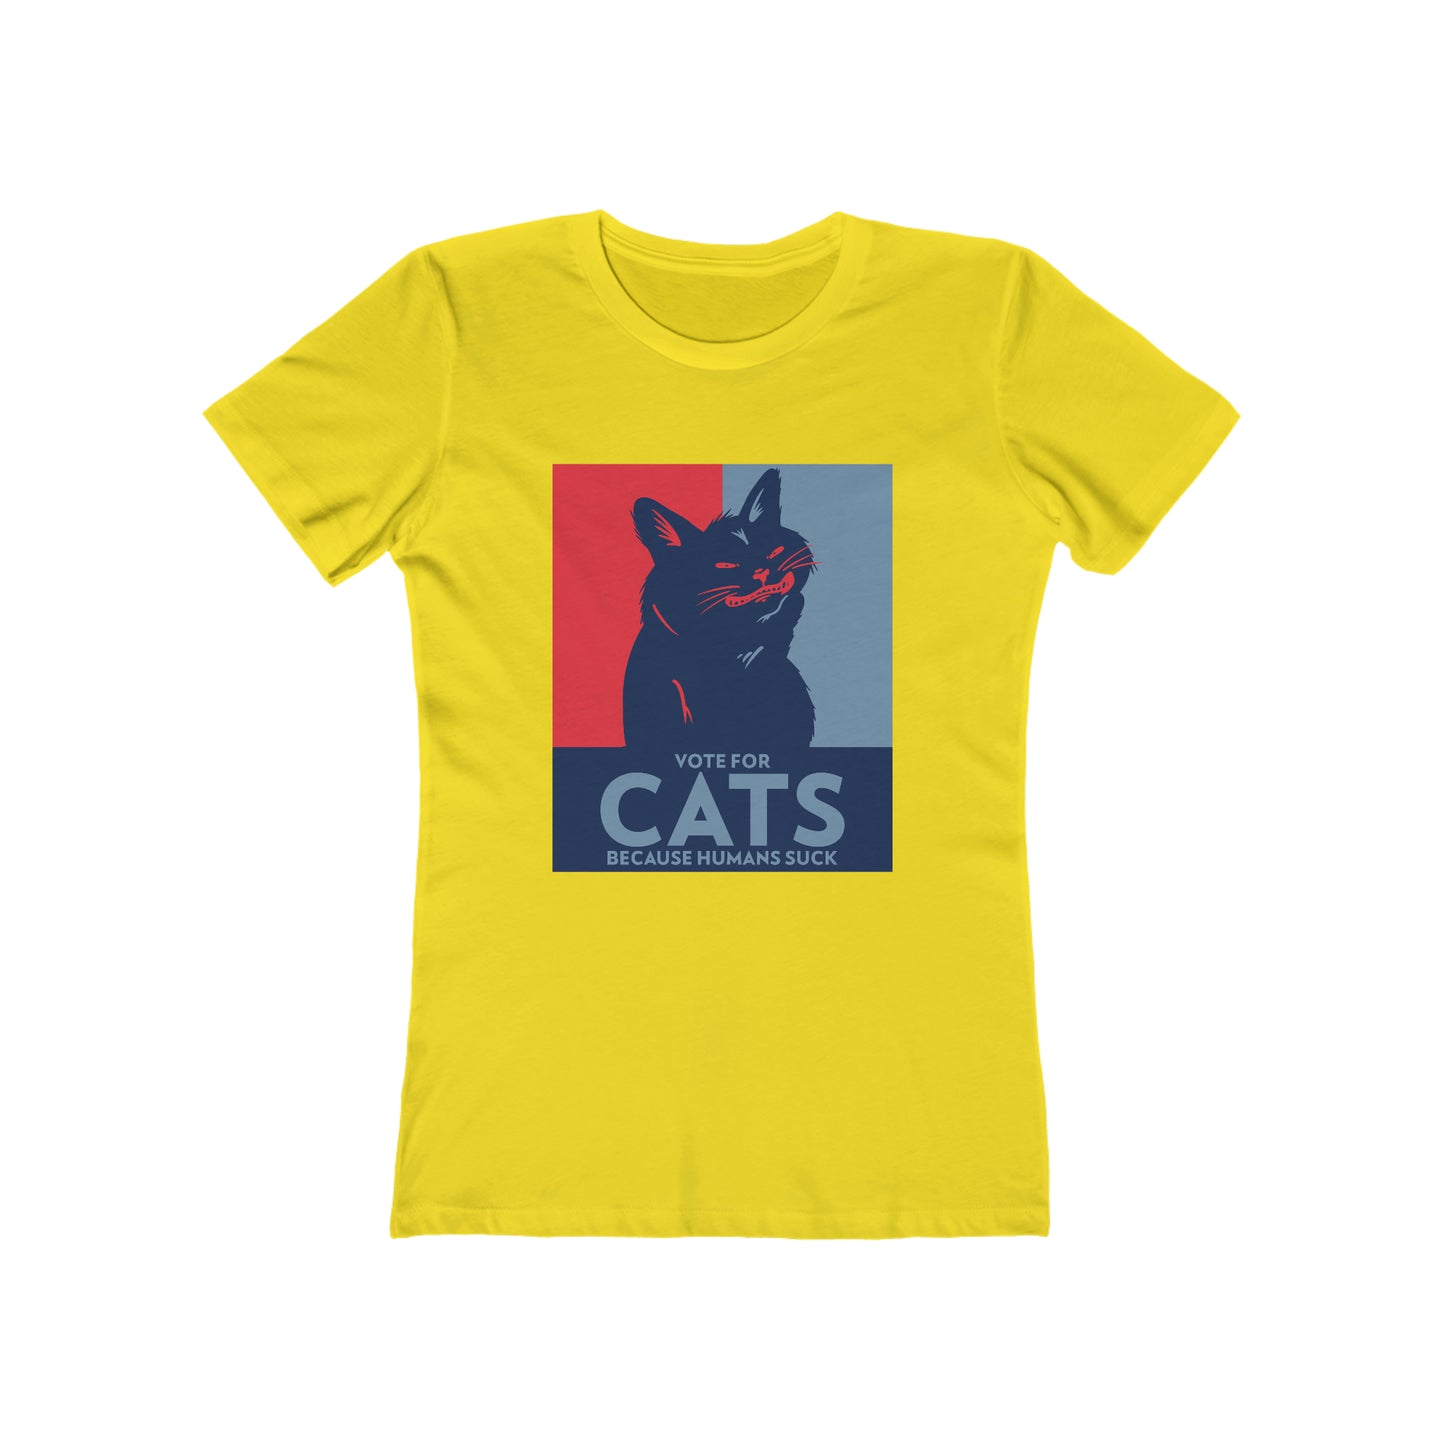 Vote for Cats - Women's T-shirt